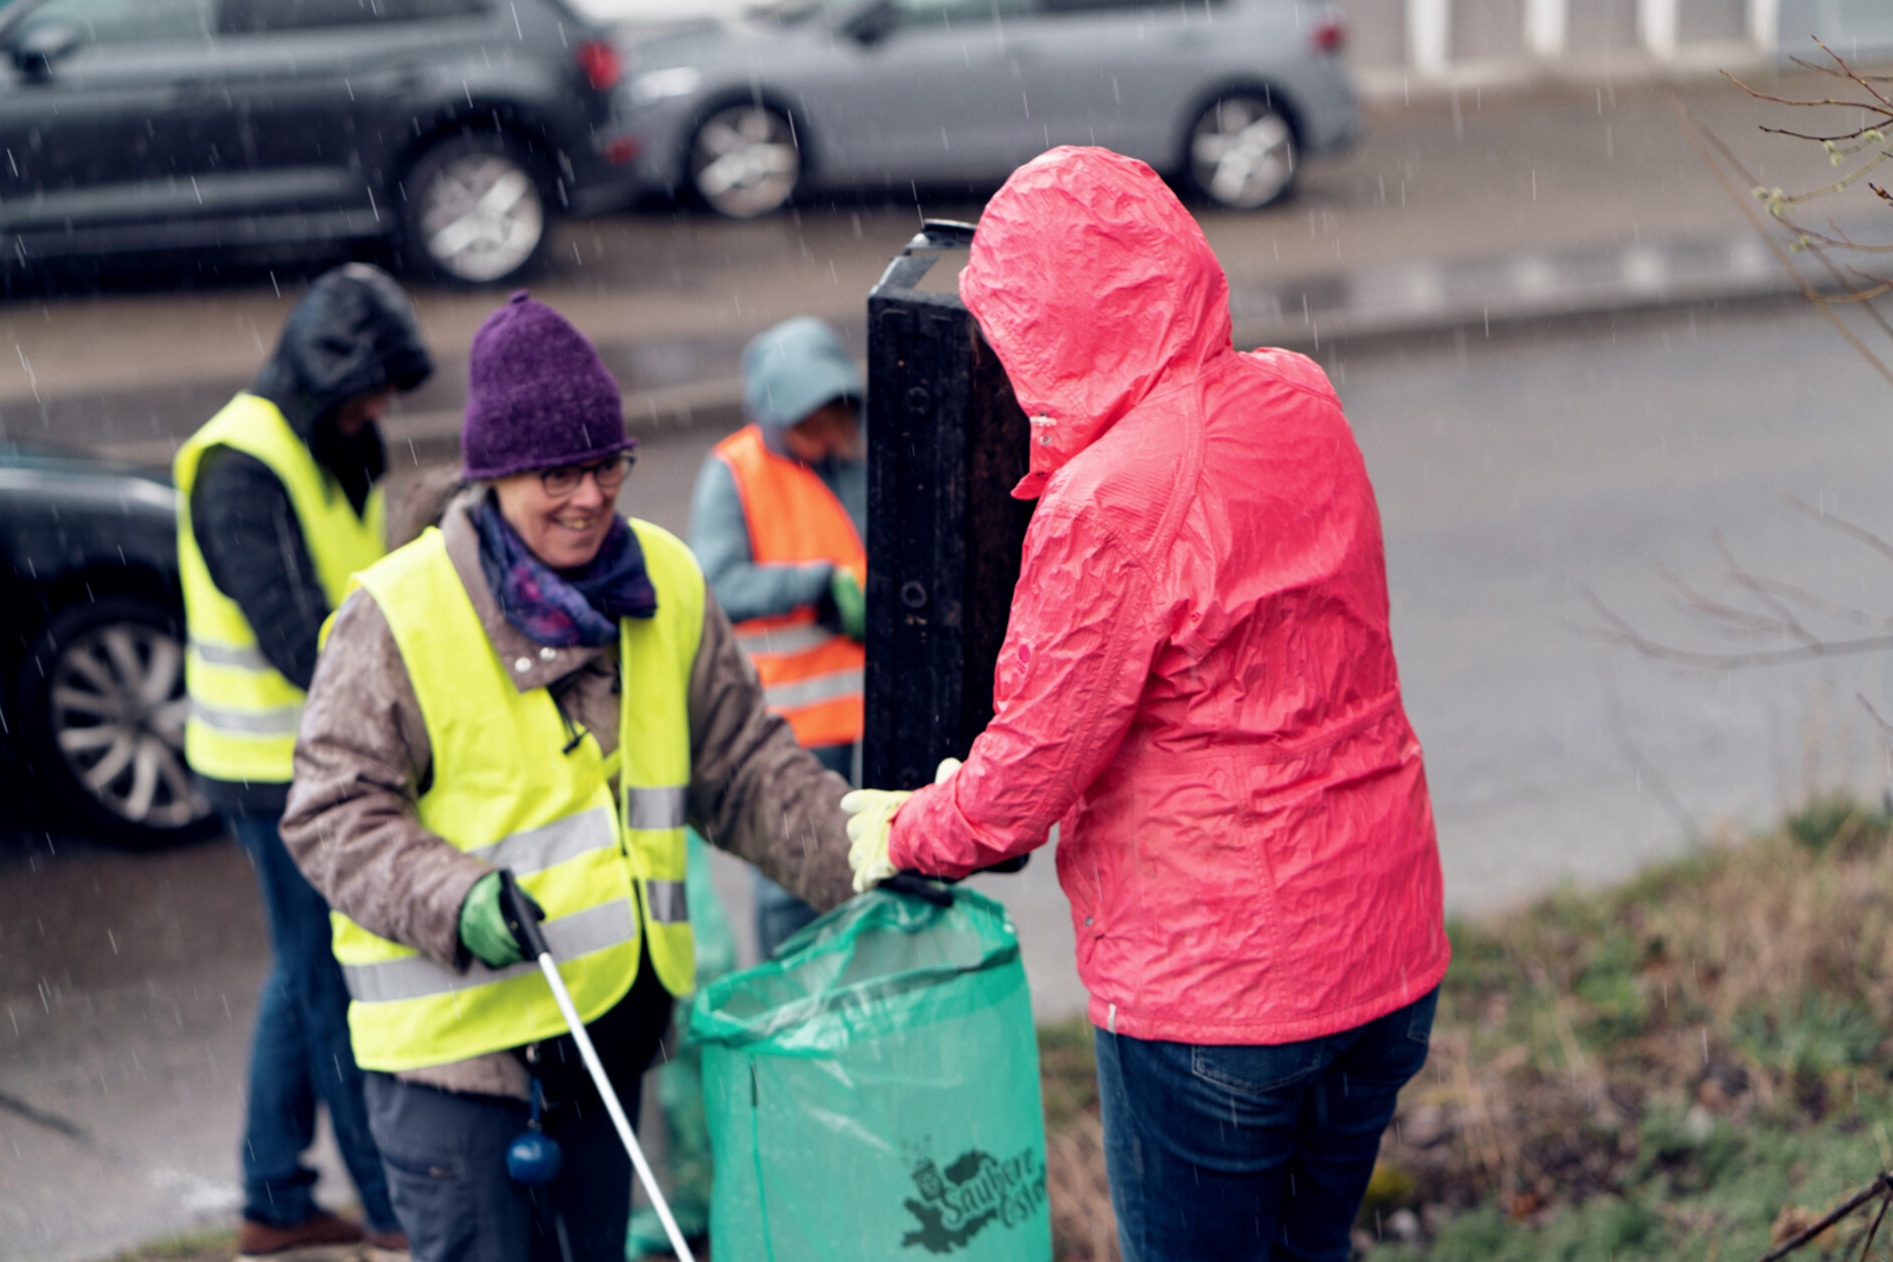 ZEISS employees picking up litter on earth day